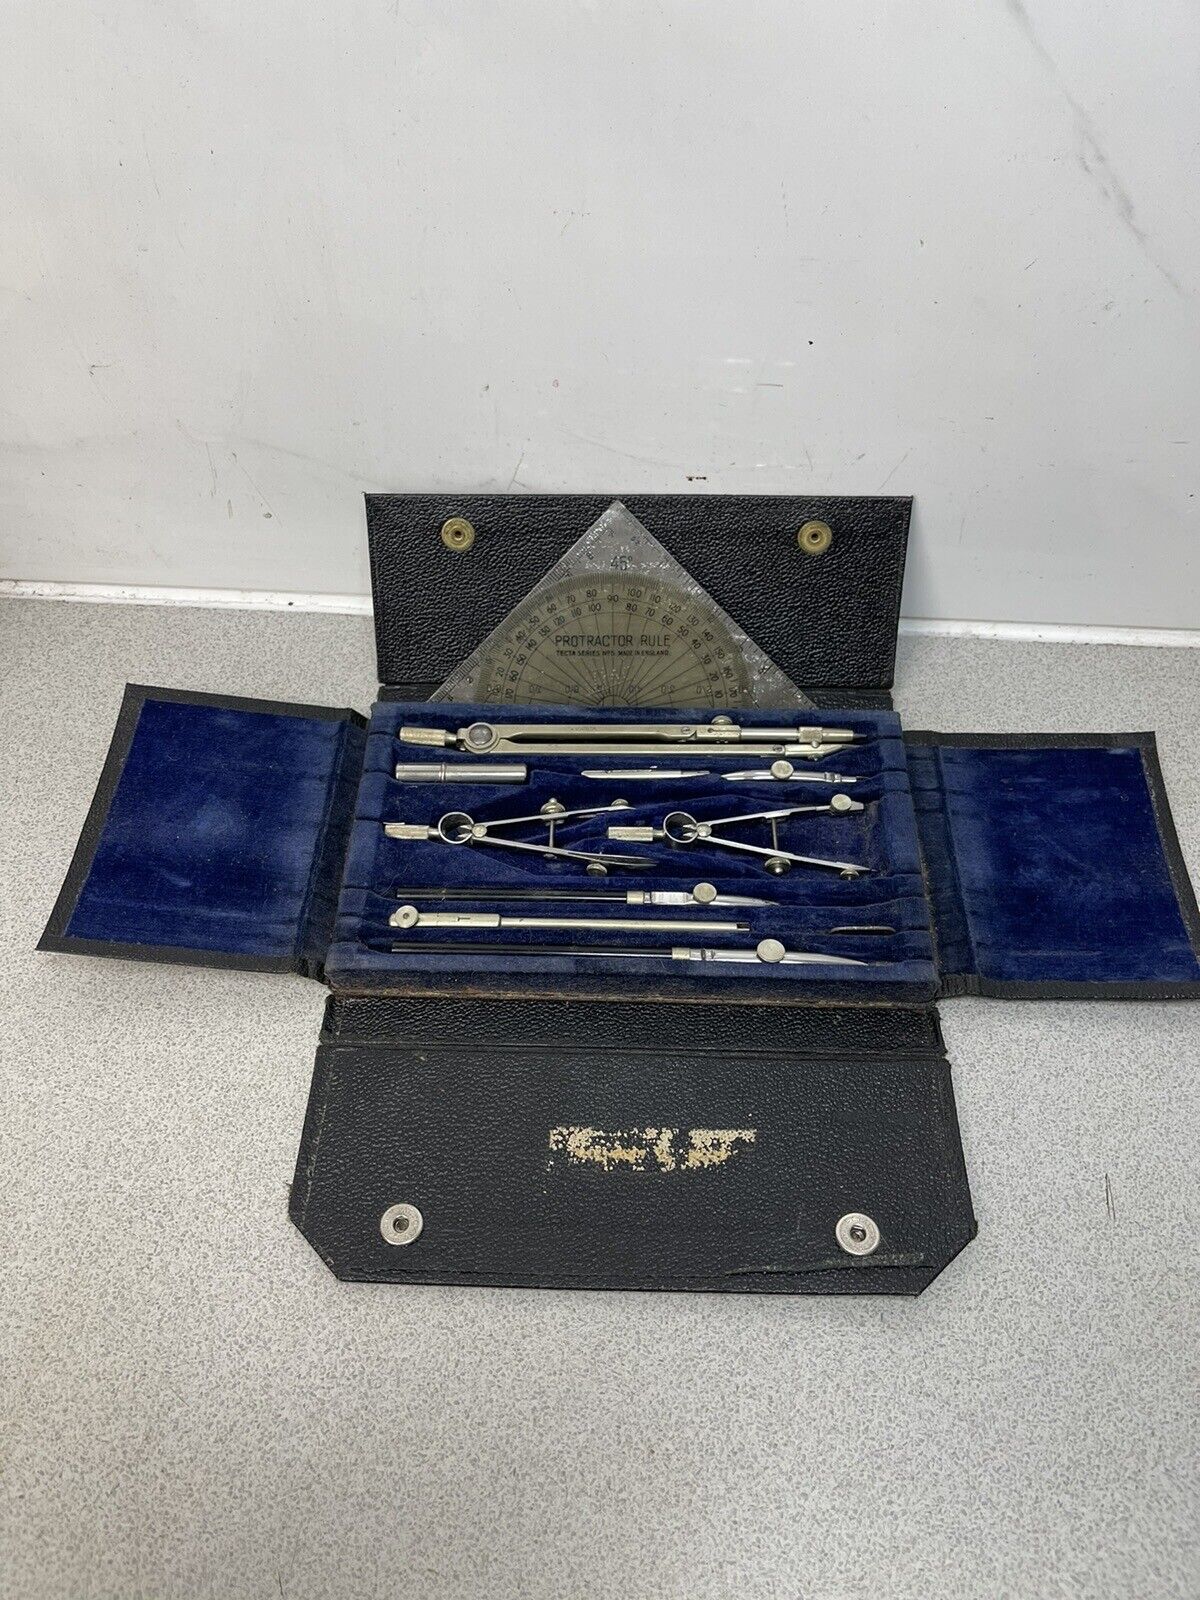 Vintage W H Harling London Engineering Technical Drawing Draughtsman Compass Set